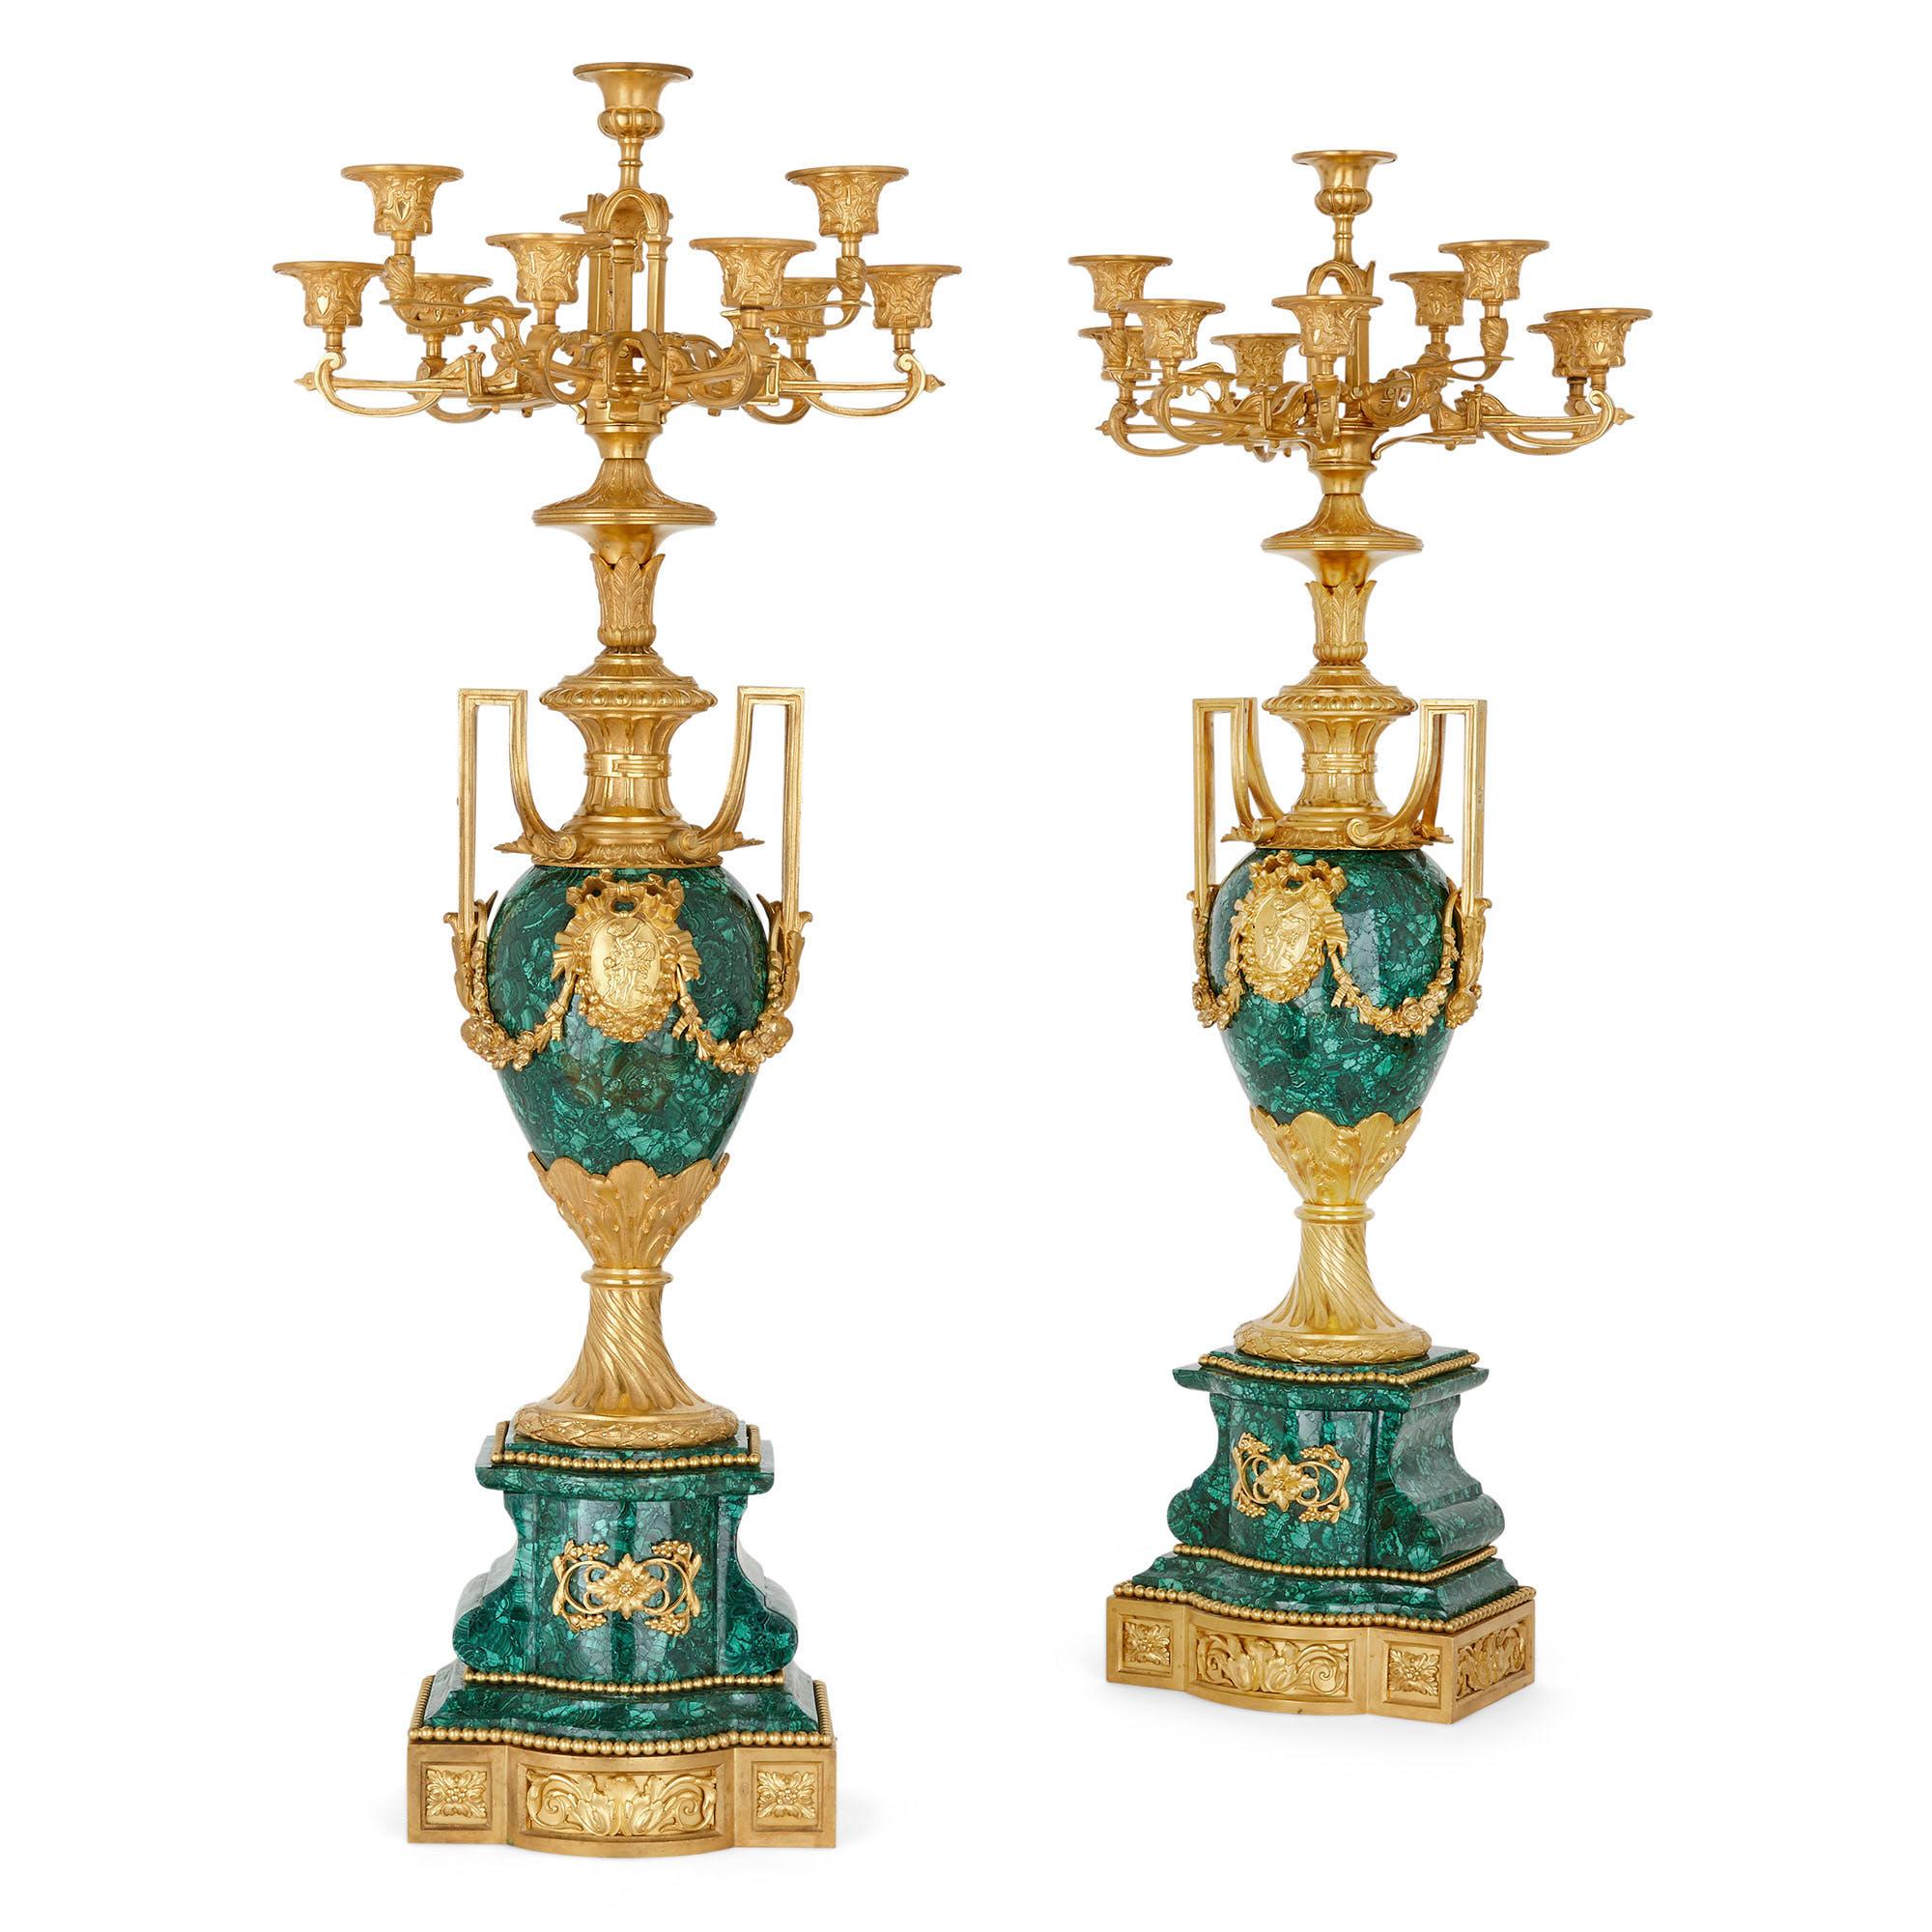 Napoleon III Period Neoclassical Malachite and Gilt Bronze Clock Set by Picard In Good Condition For Sale In London, GB